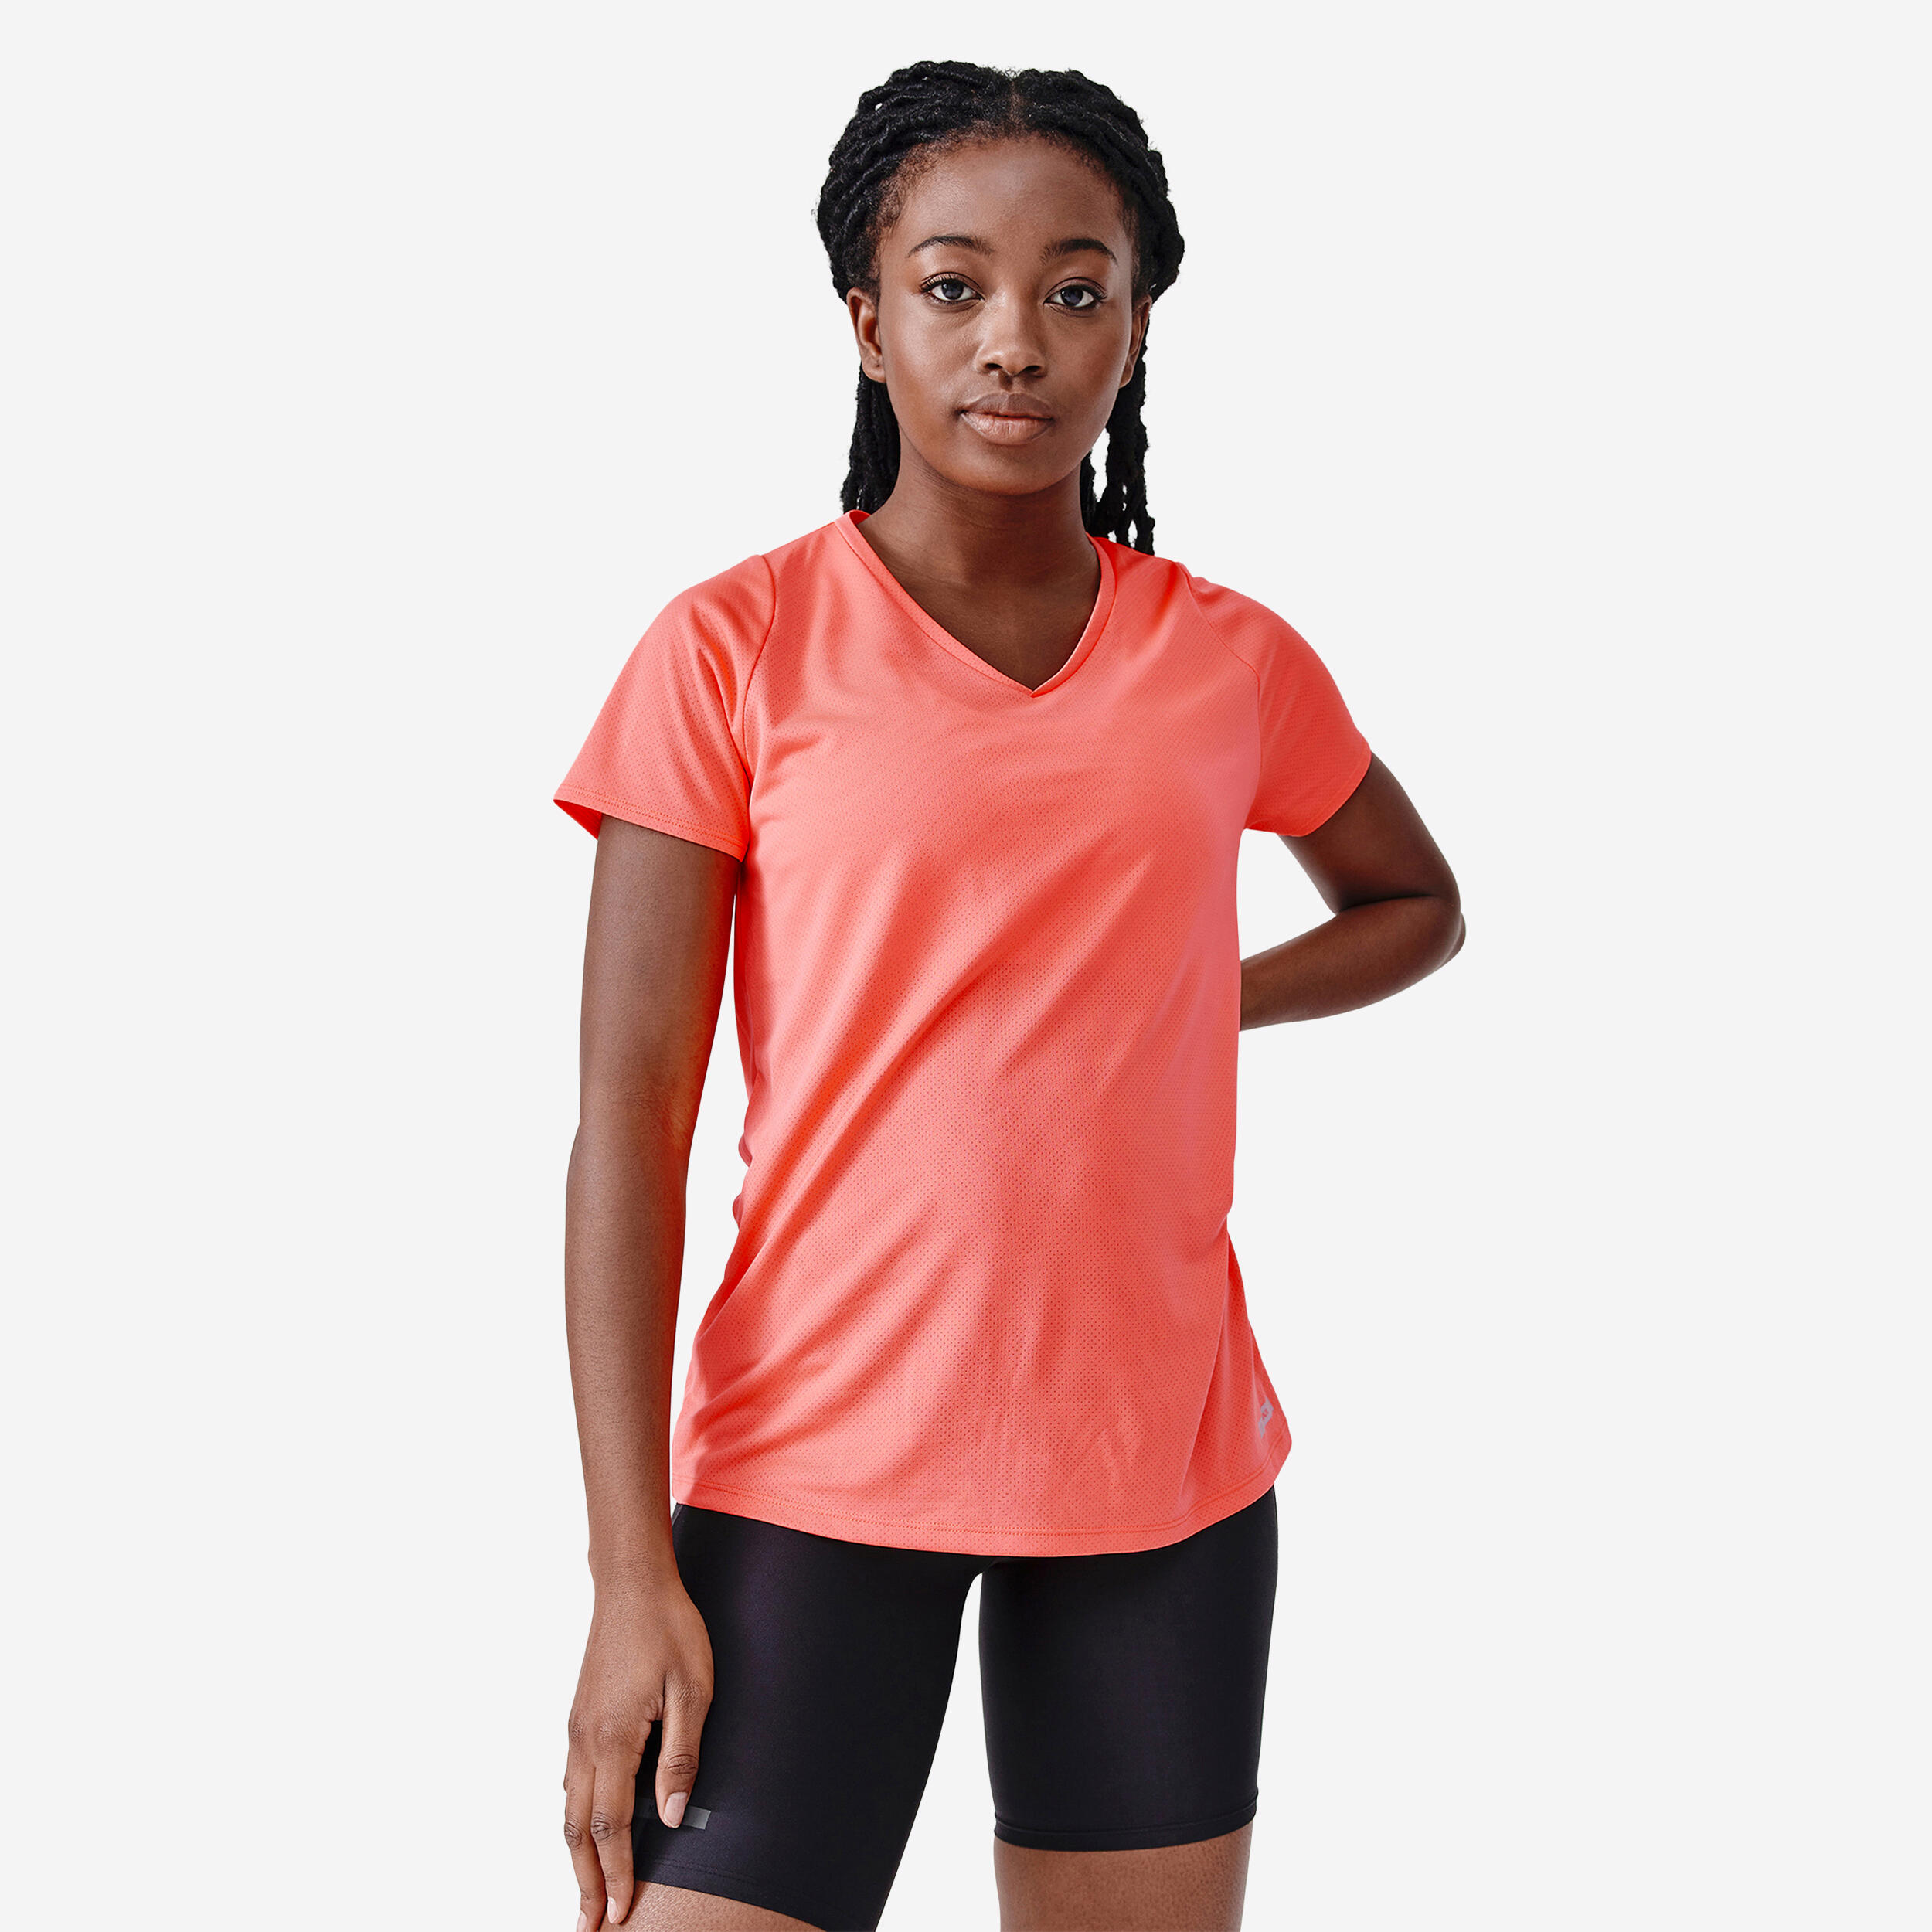 Women's breathable short-sleeved running T-shirt Dry - coral 1/6